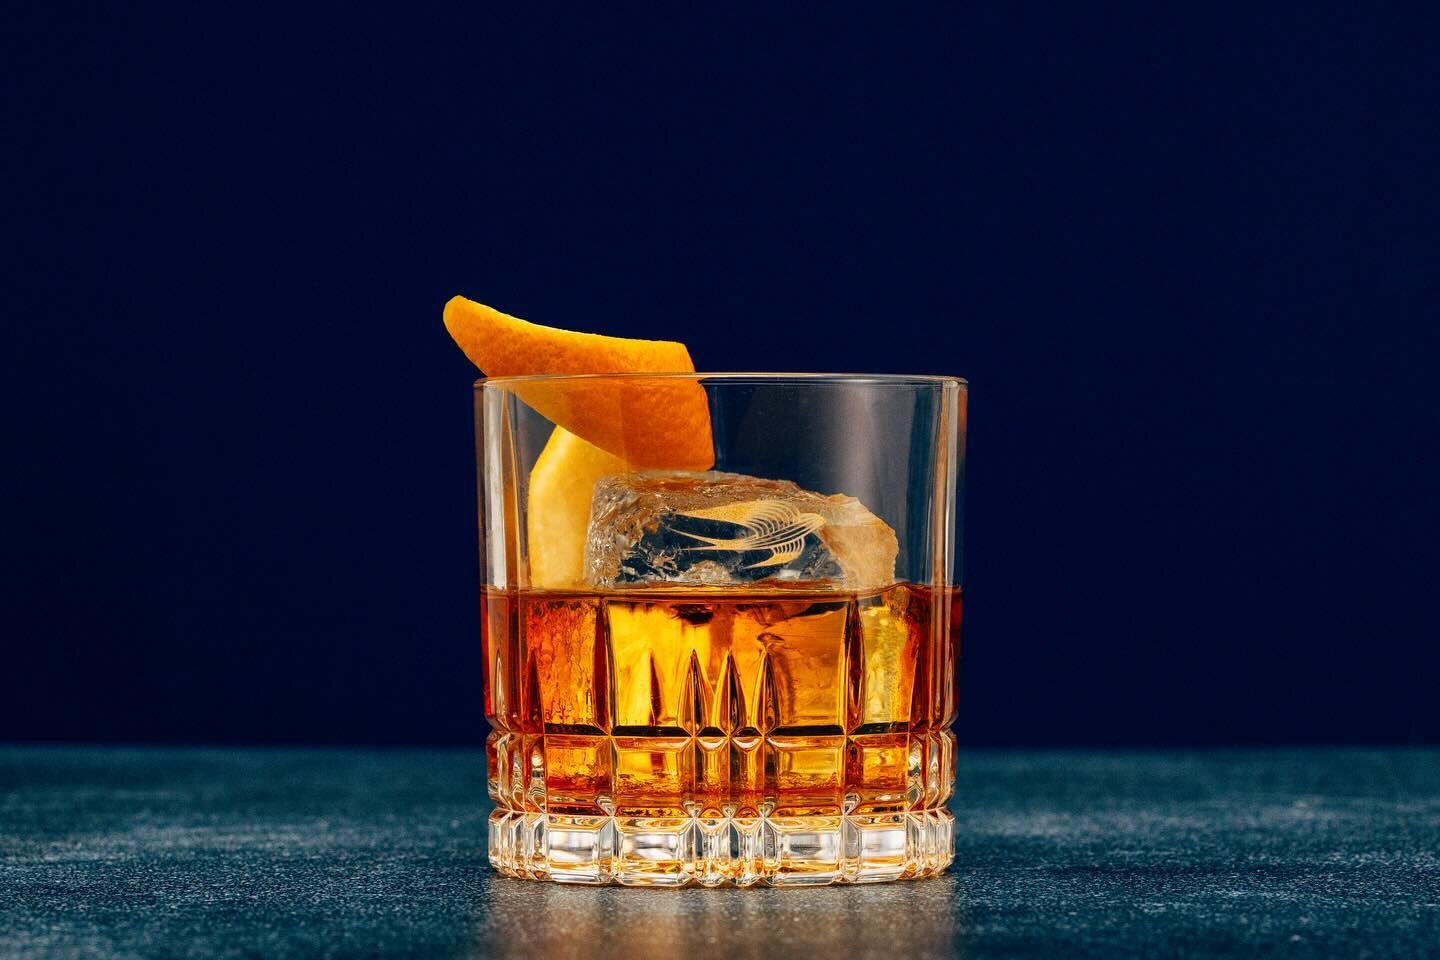 Cocktails shots and edit for @martellusa. 
Produced by @paradoxal_residency 
Location: @rambow.studio 

#cocktails #drinks #martell #cognac #liquor #photography #studio #photooftheday